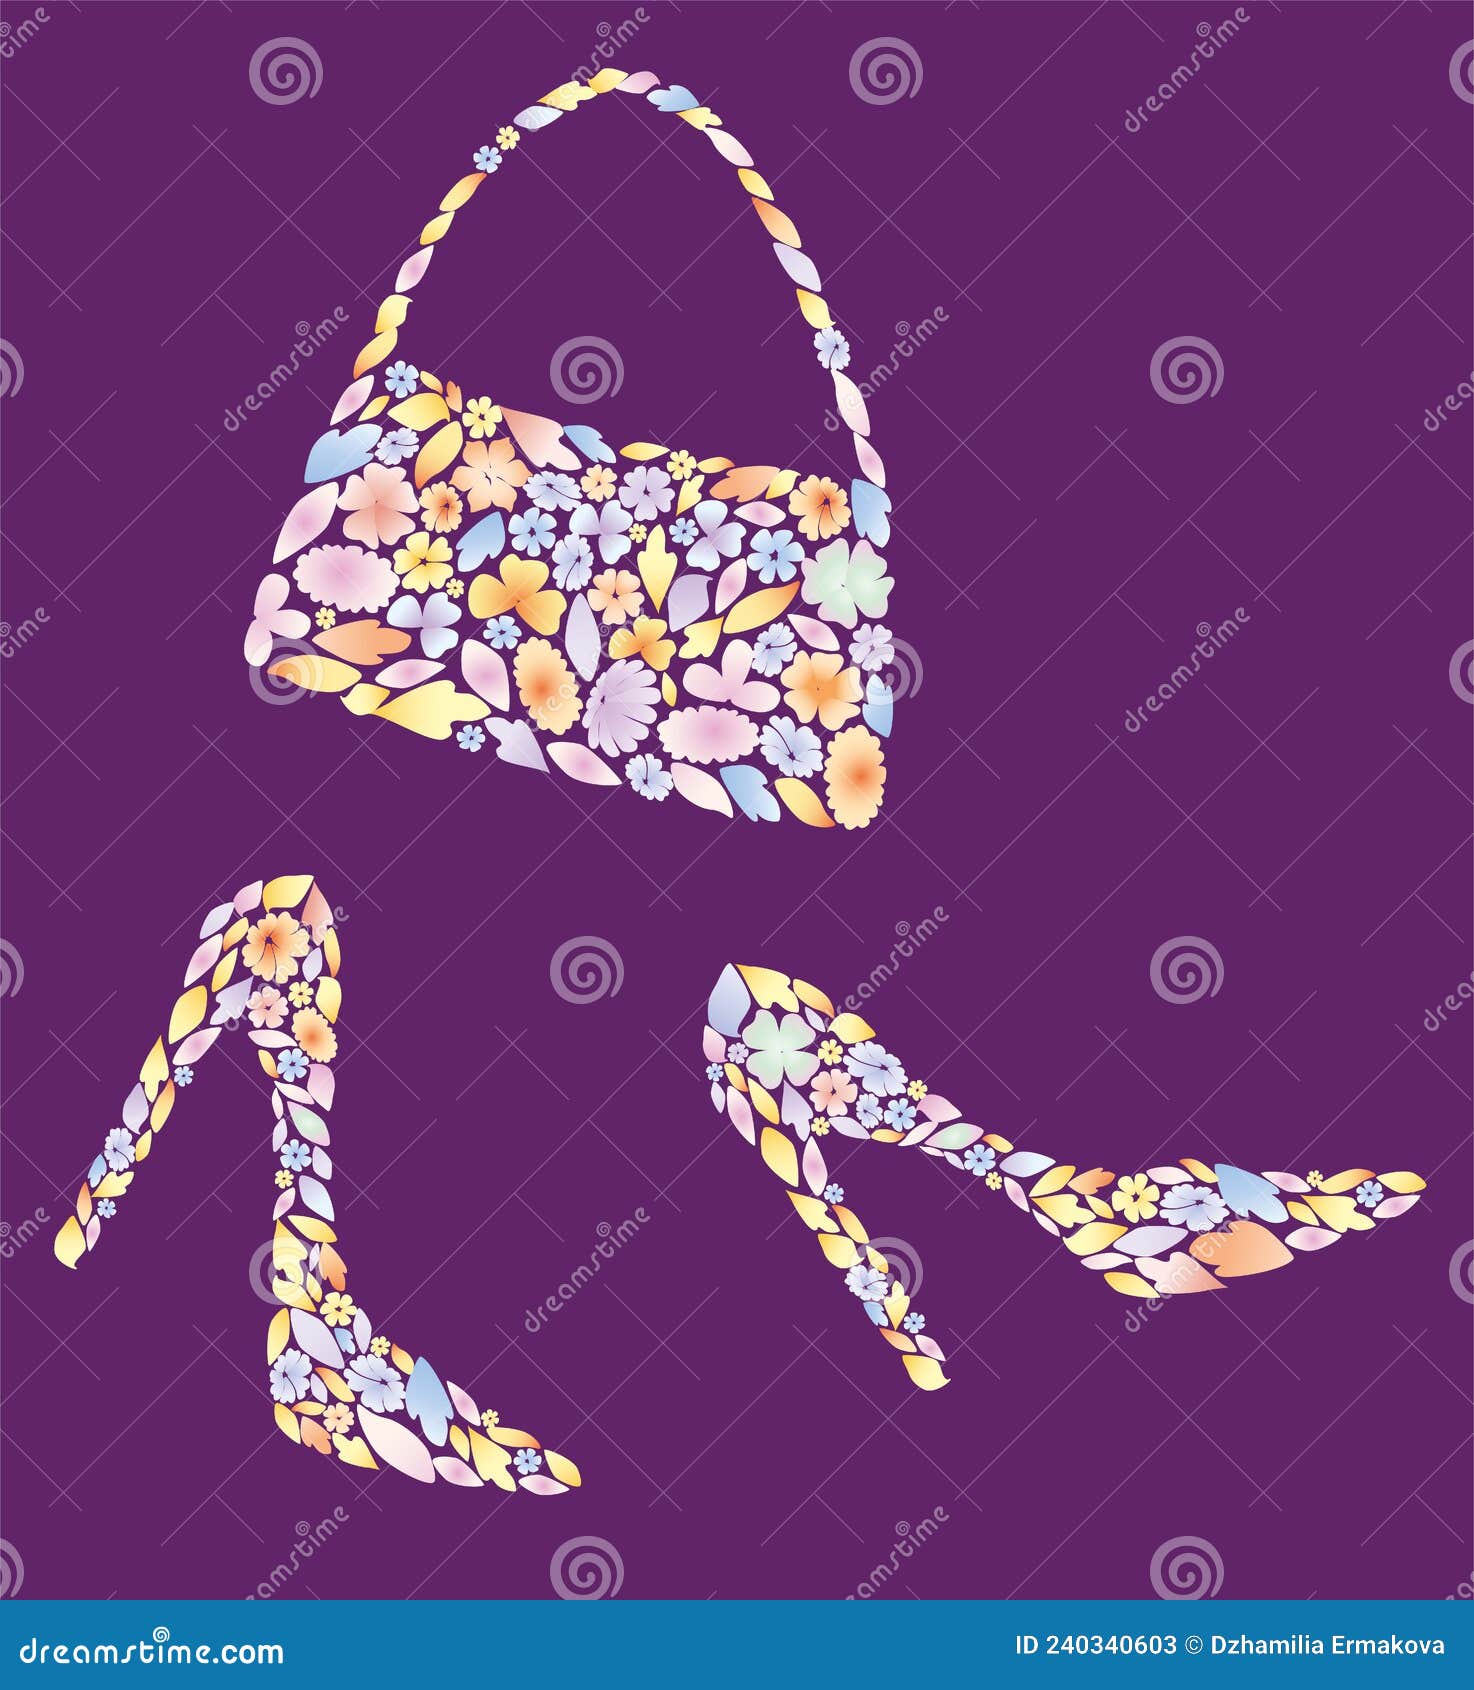 decorative silhouettes elegante female shoes on high heels and small handbag from abstract colorful flowers and leaves